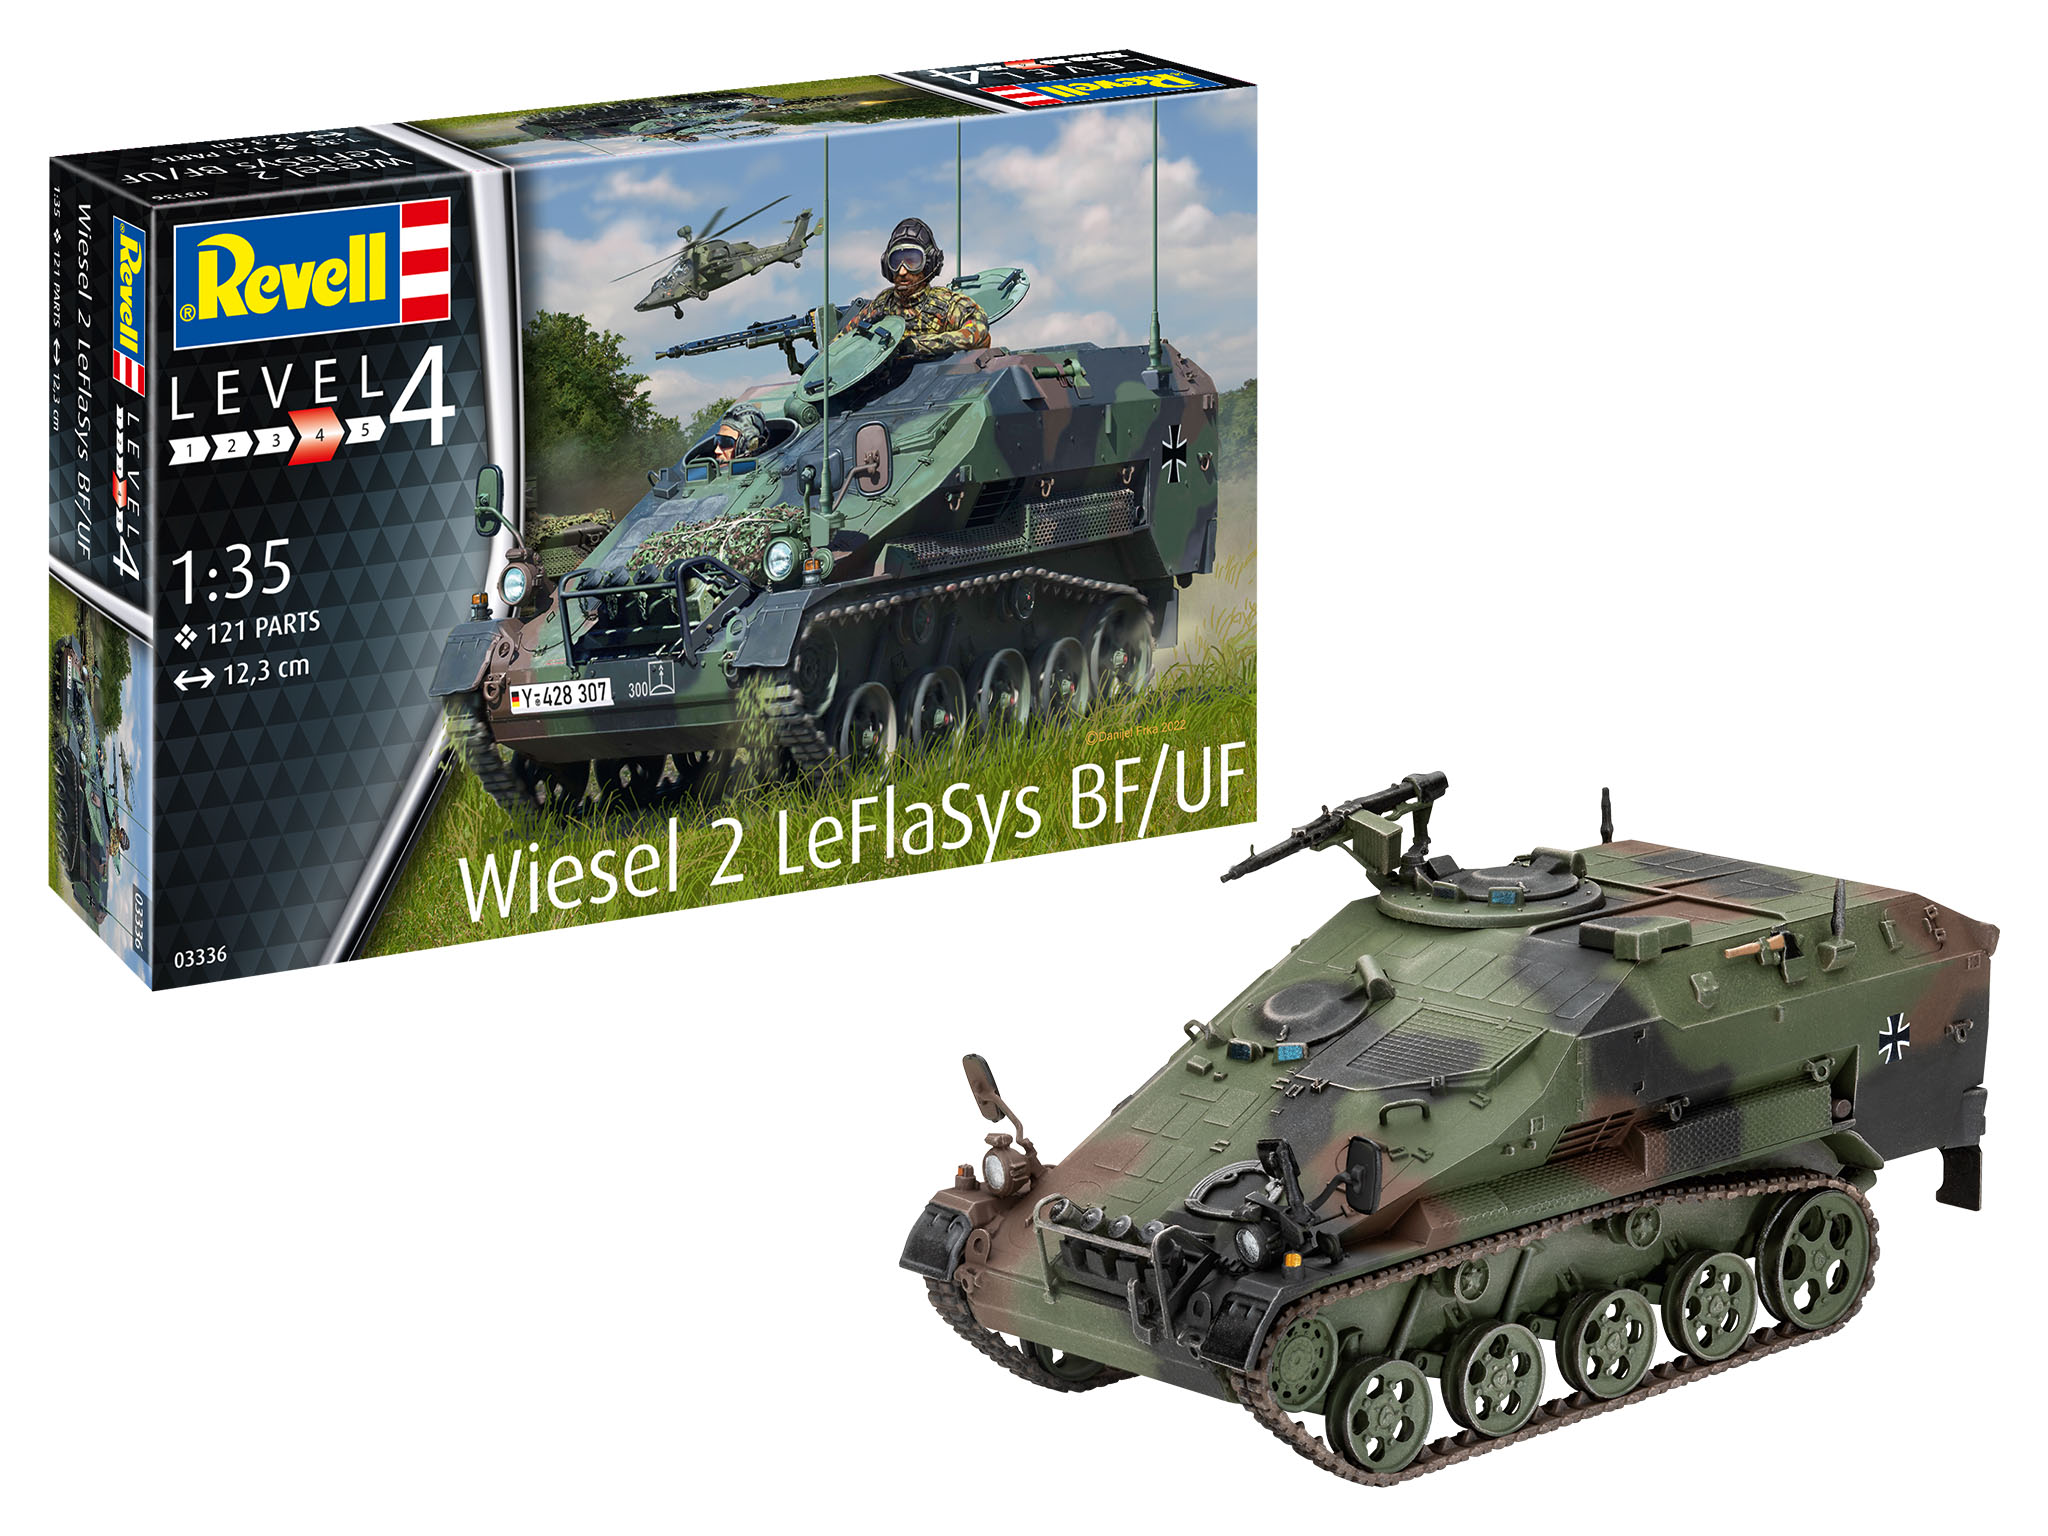 revell-03336-Wiesel-2-LeFlaSys-BF-UF-Bundeswehr-Ozelot